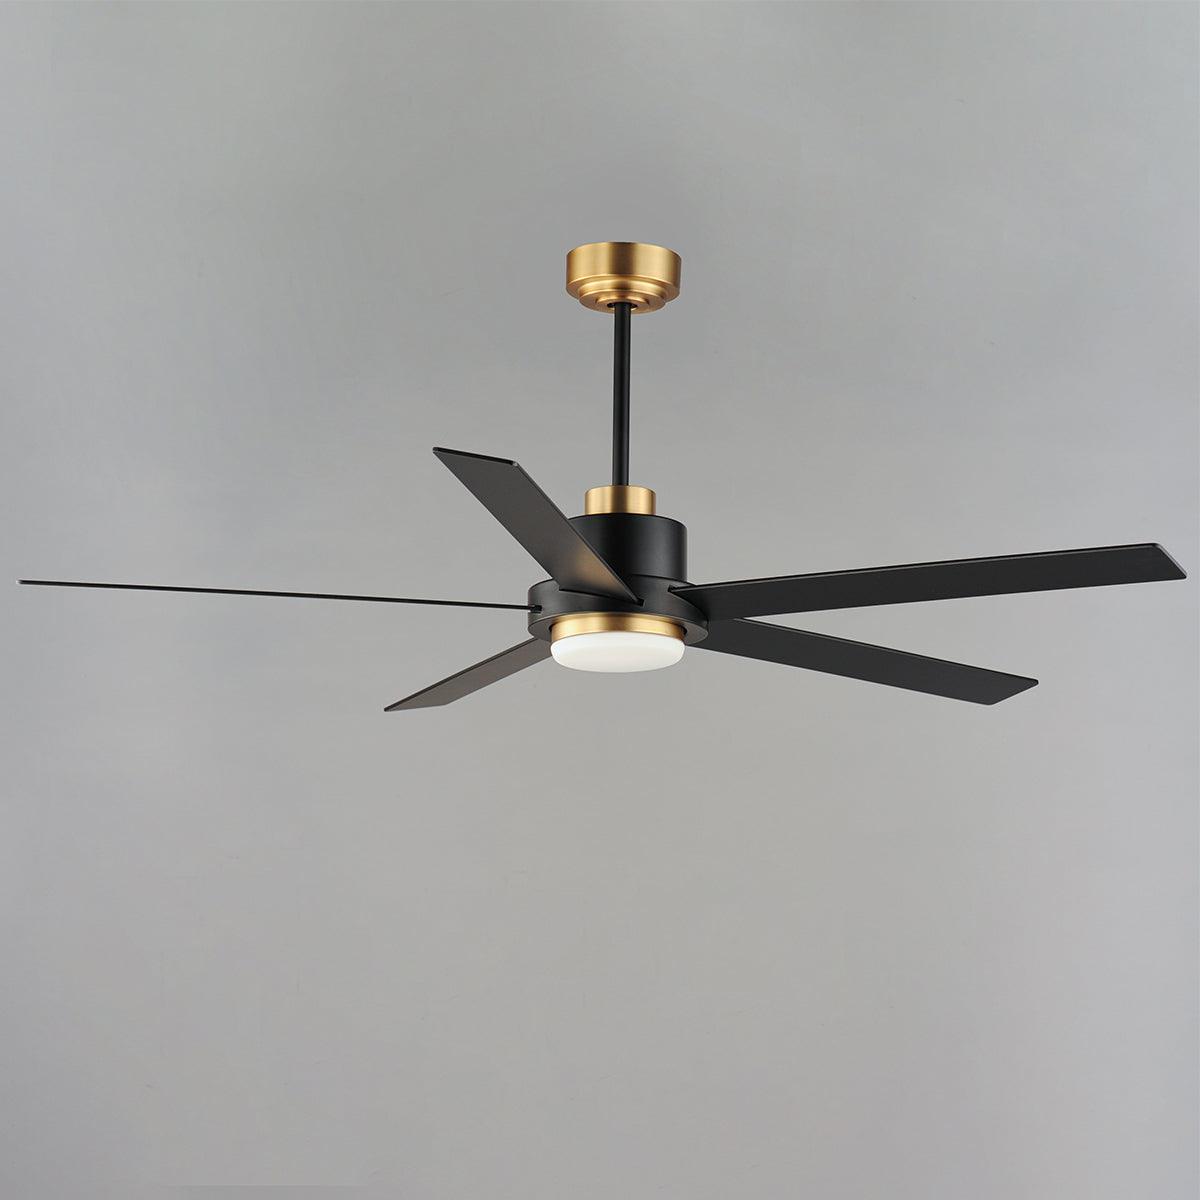 Daisy 60 Inch 5-Blade Ceiling Fan With Light and Wall Control, Black,Gold with Black Blades - Bees Lighting